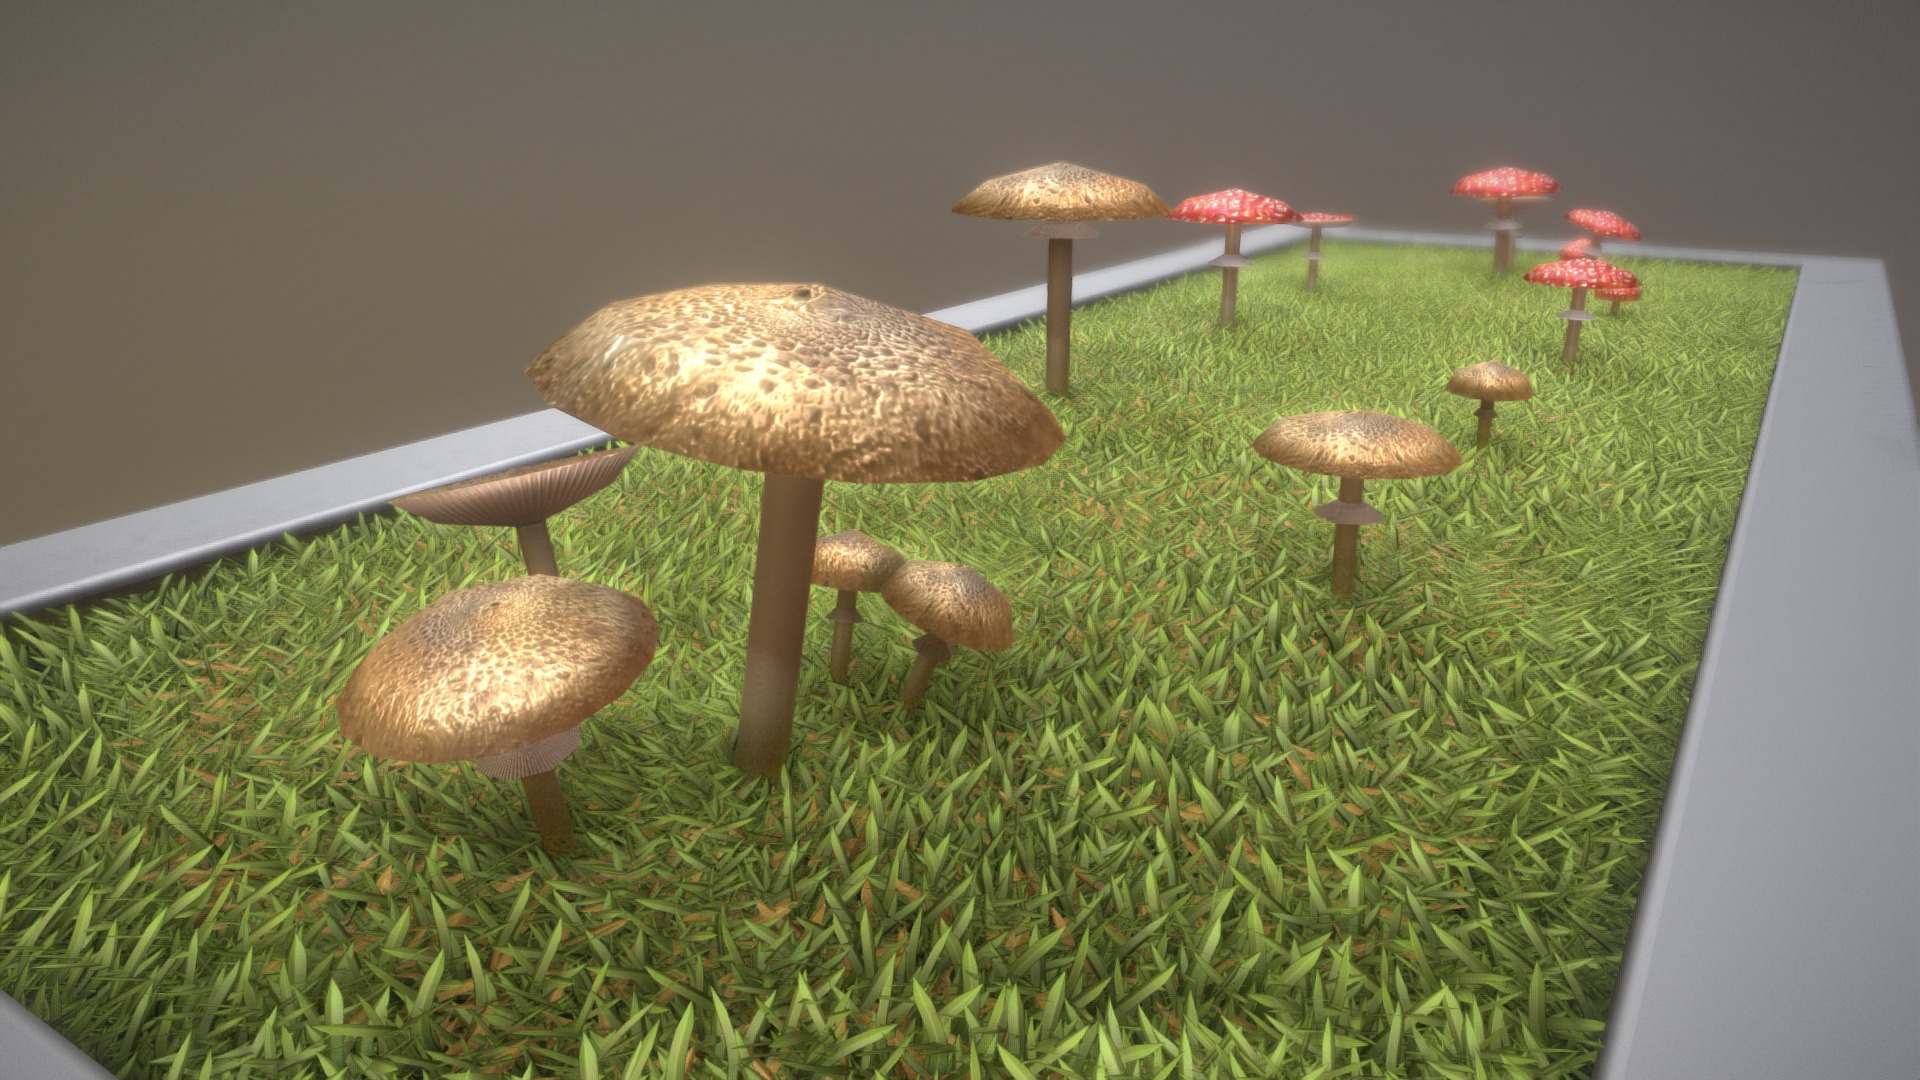 3D model Pilze – Fliegenpilz und Parasolpilz - This is a 3D model of the Pilze - Fliegenpilz und Parasolpilz. The 3D model is about a group of wooden tables.